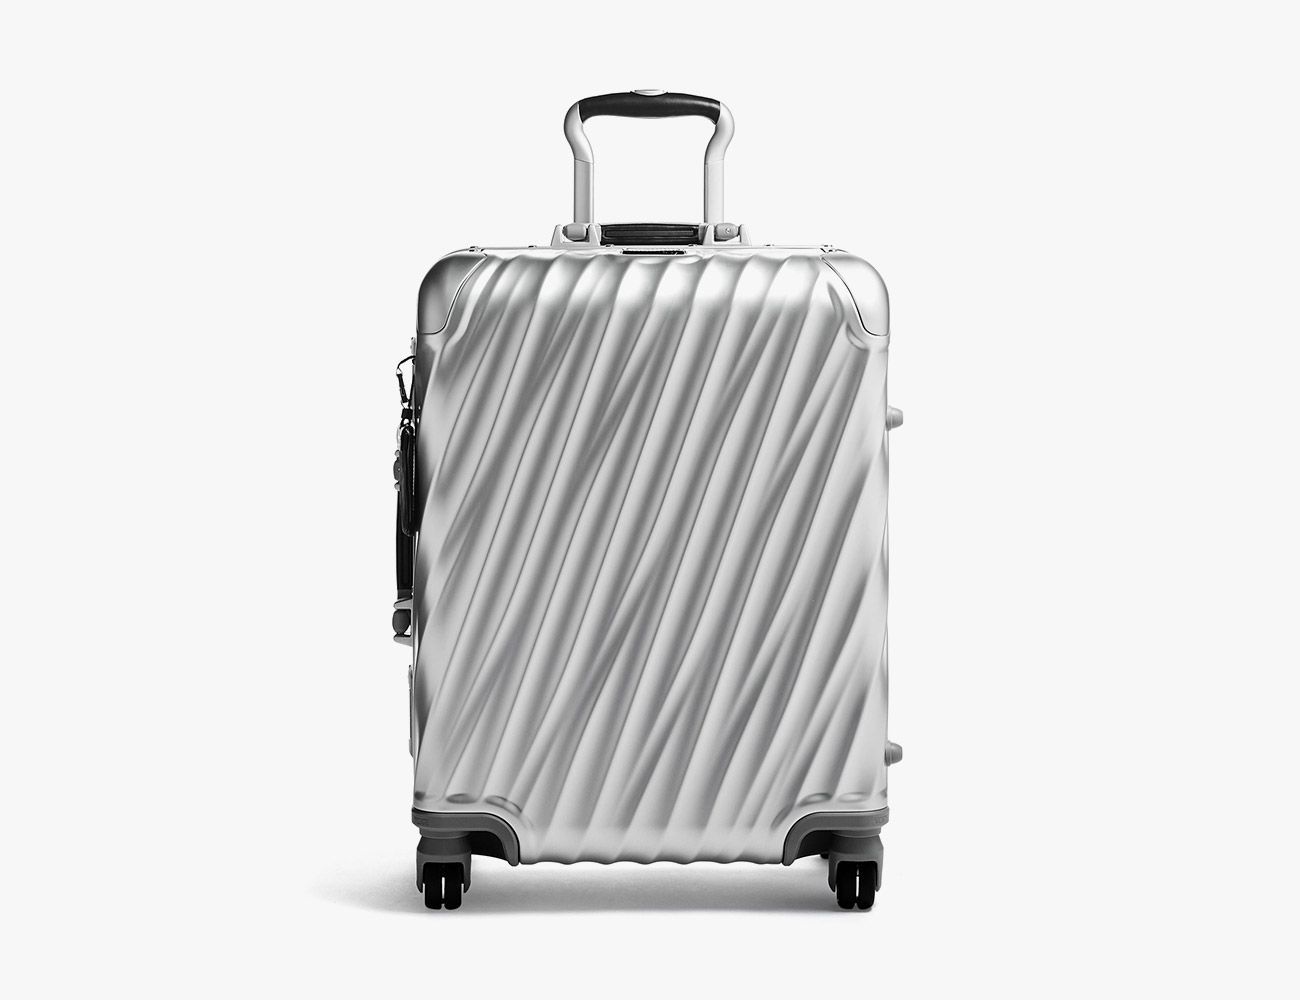 Review: How does the Autonomous Aluminum Carry-On Compare to